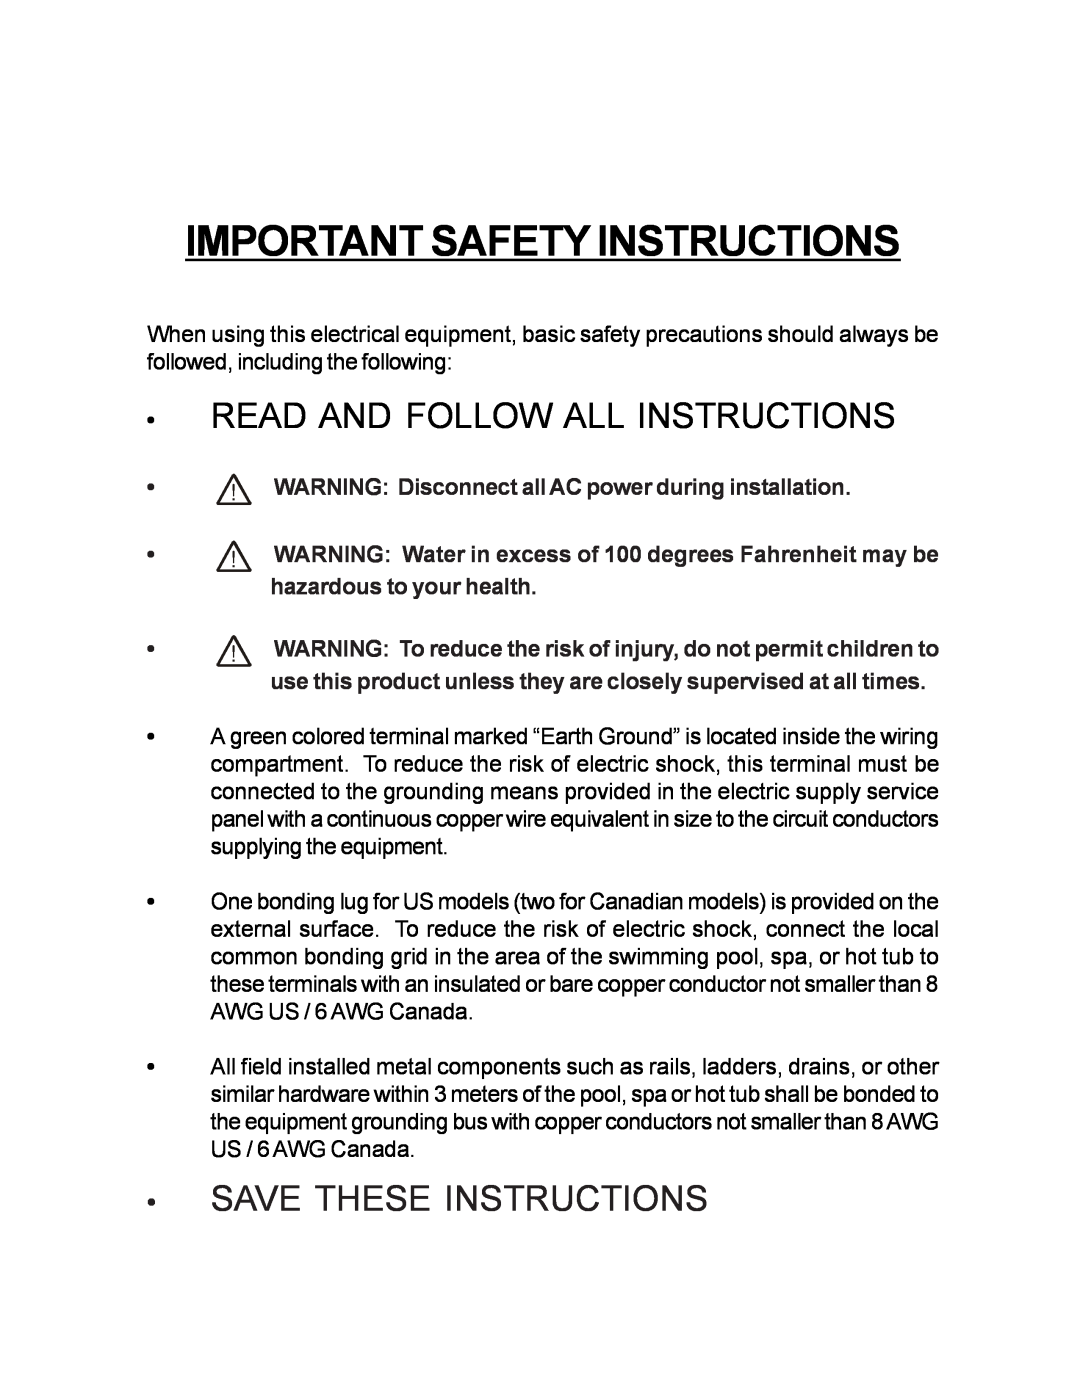 Raypak PS-4 PS-8 Important Safety Instructions, Read And Follow All Instructions, Save These Instructions 